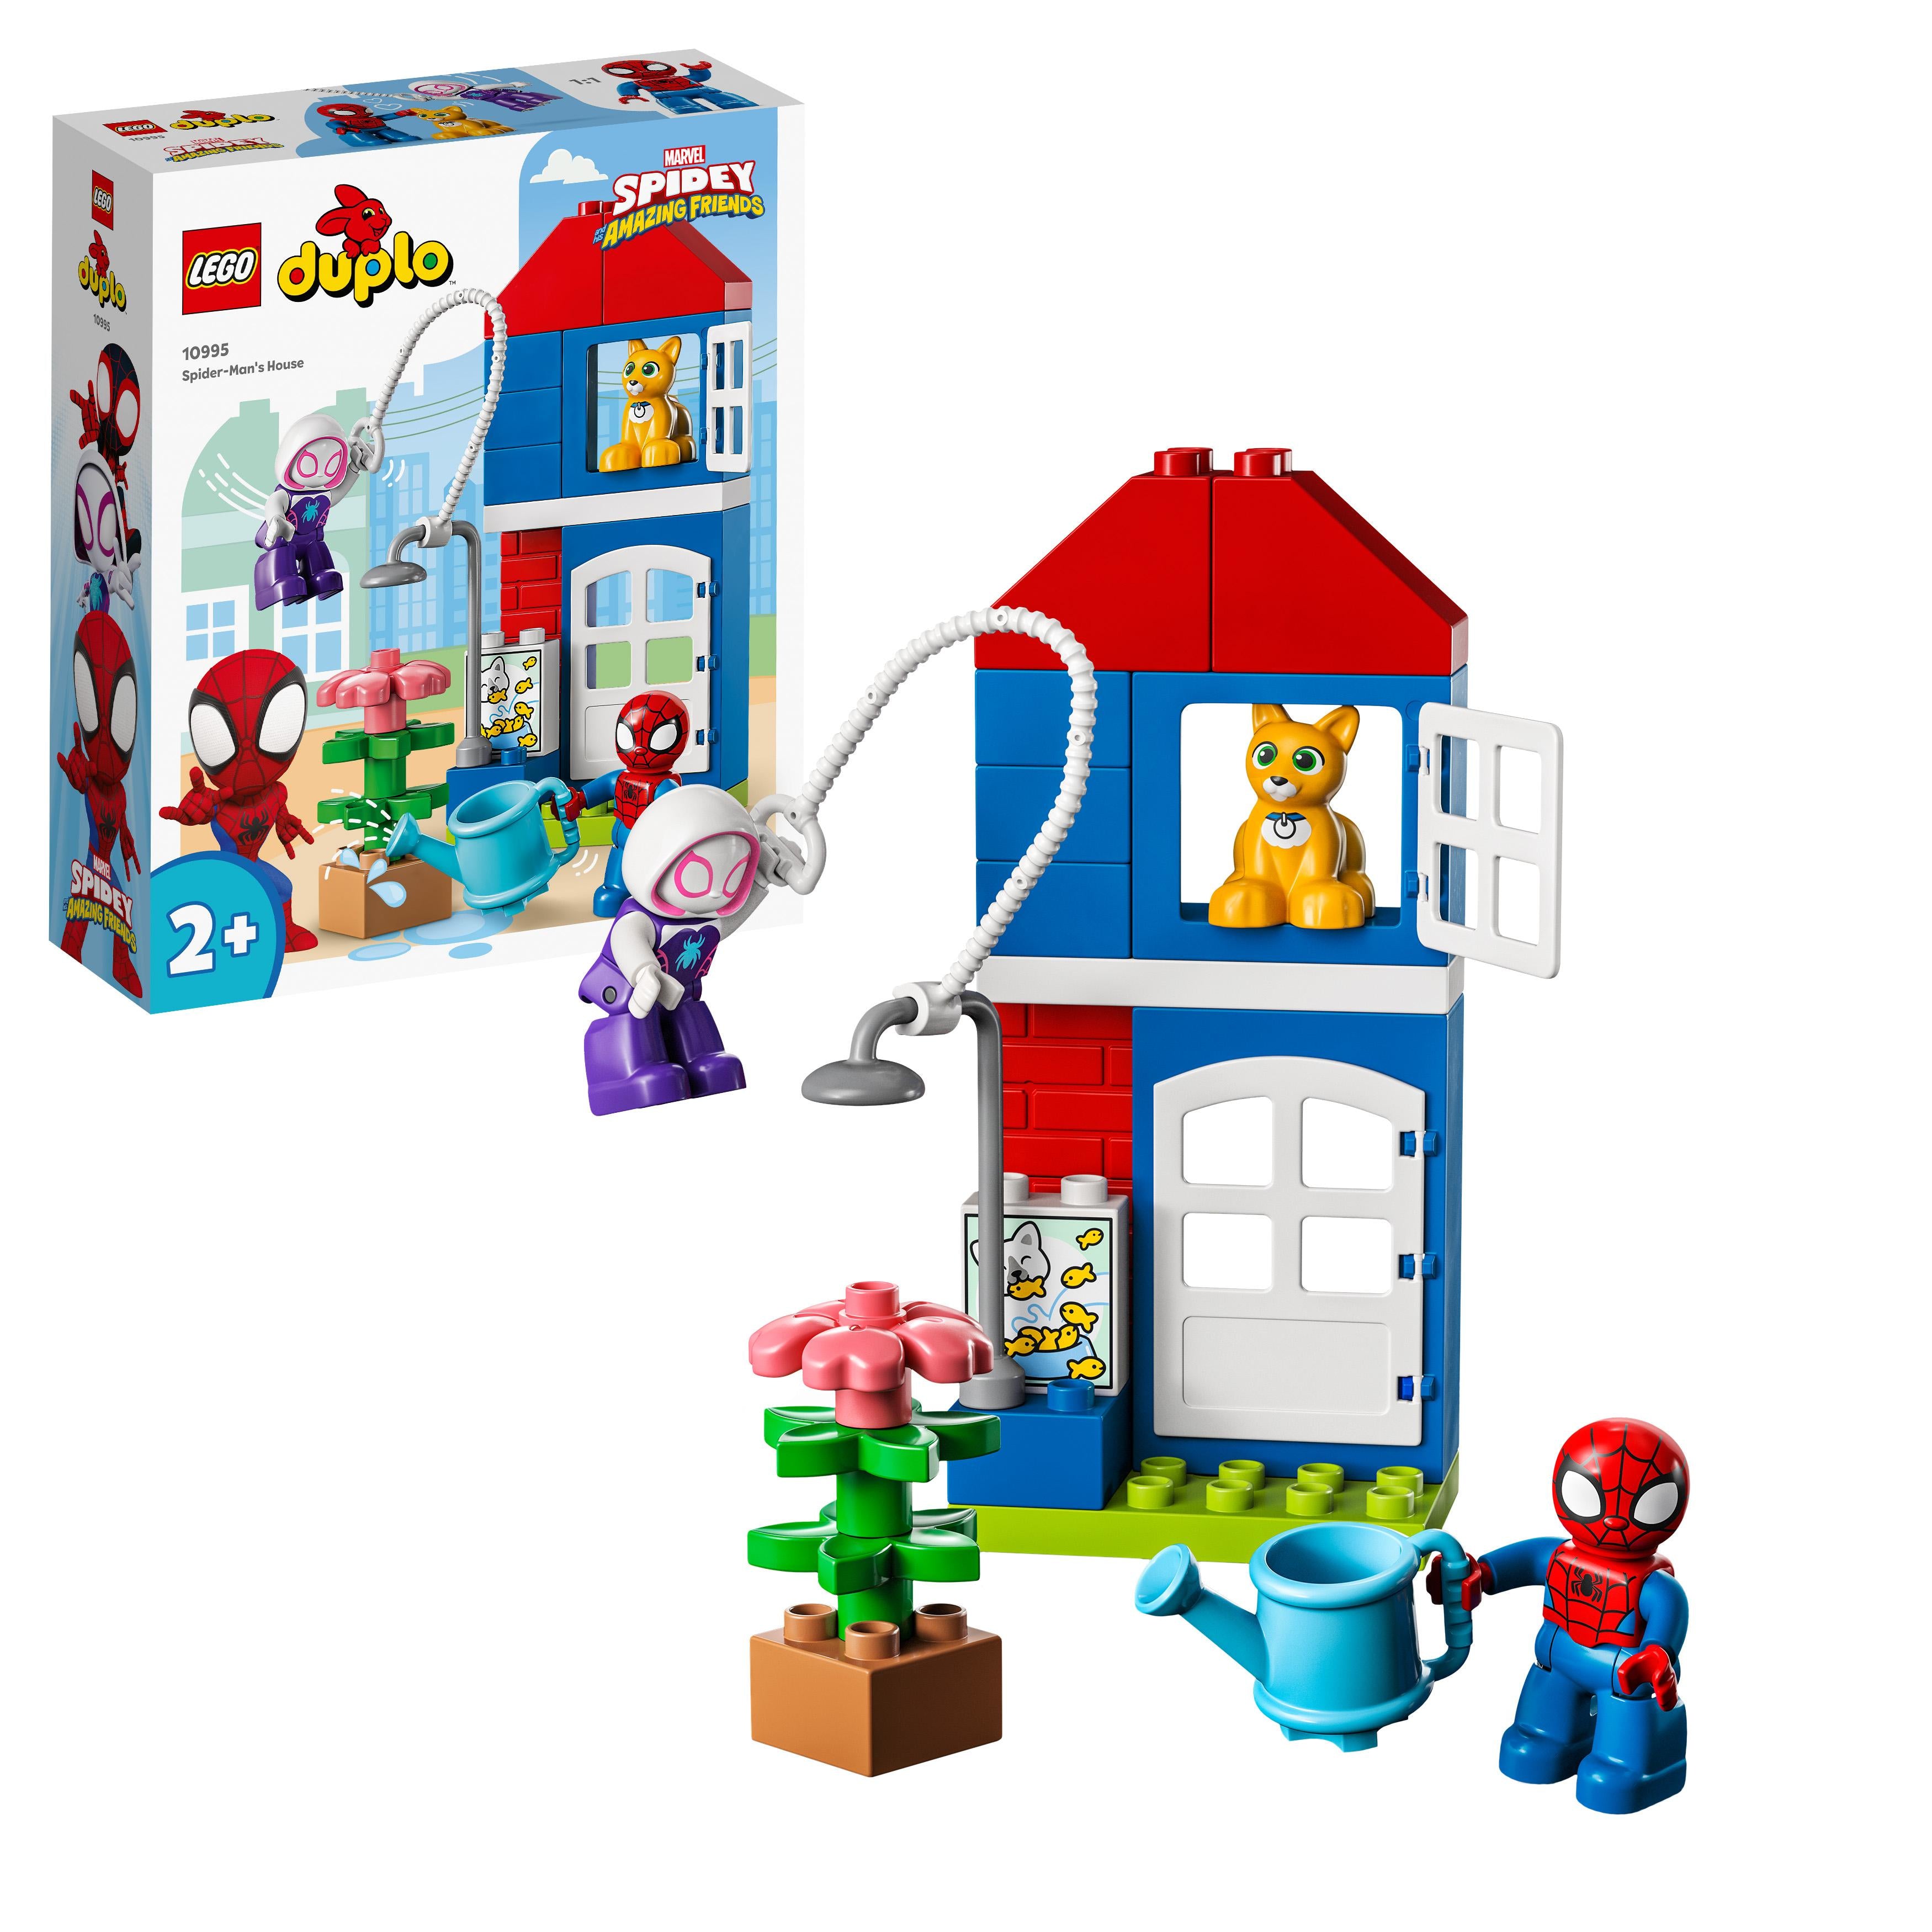 LEGO 10995 DUPLO Marvel Spider-Man’s House, Spidey and His Amazing Friends Buildable Toy for 2 Plus Years Old Toddlers, Boys & Girls, Super Hero Set